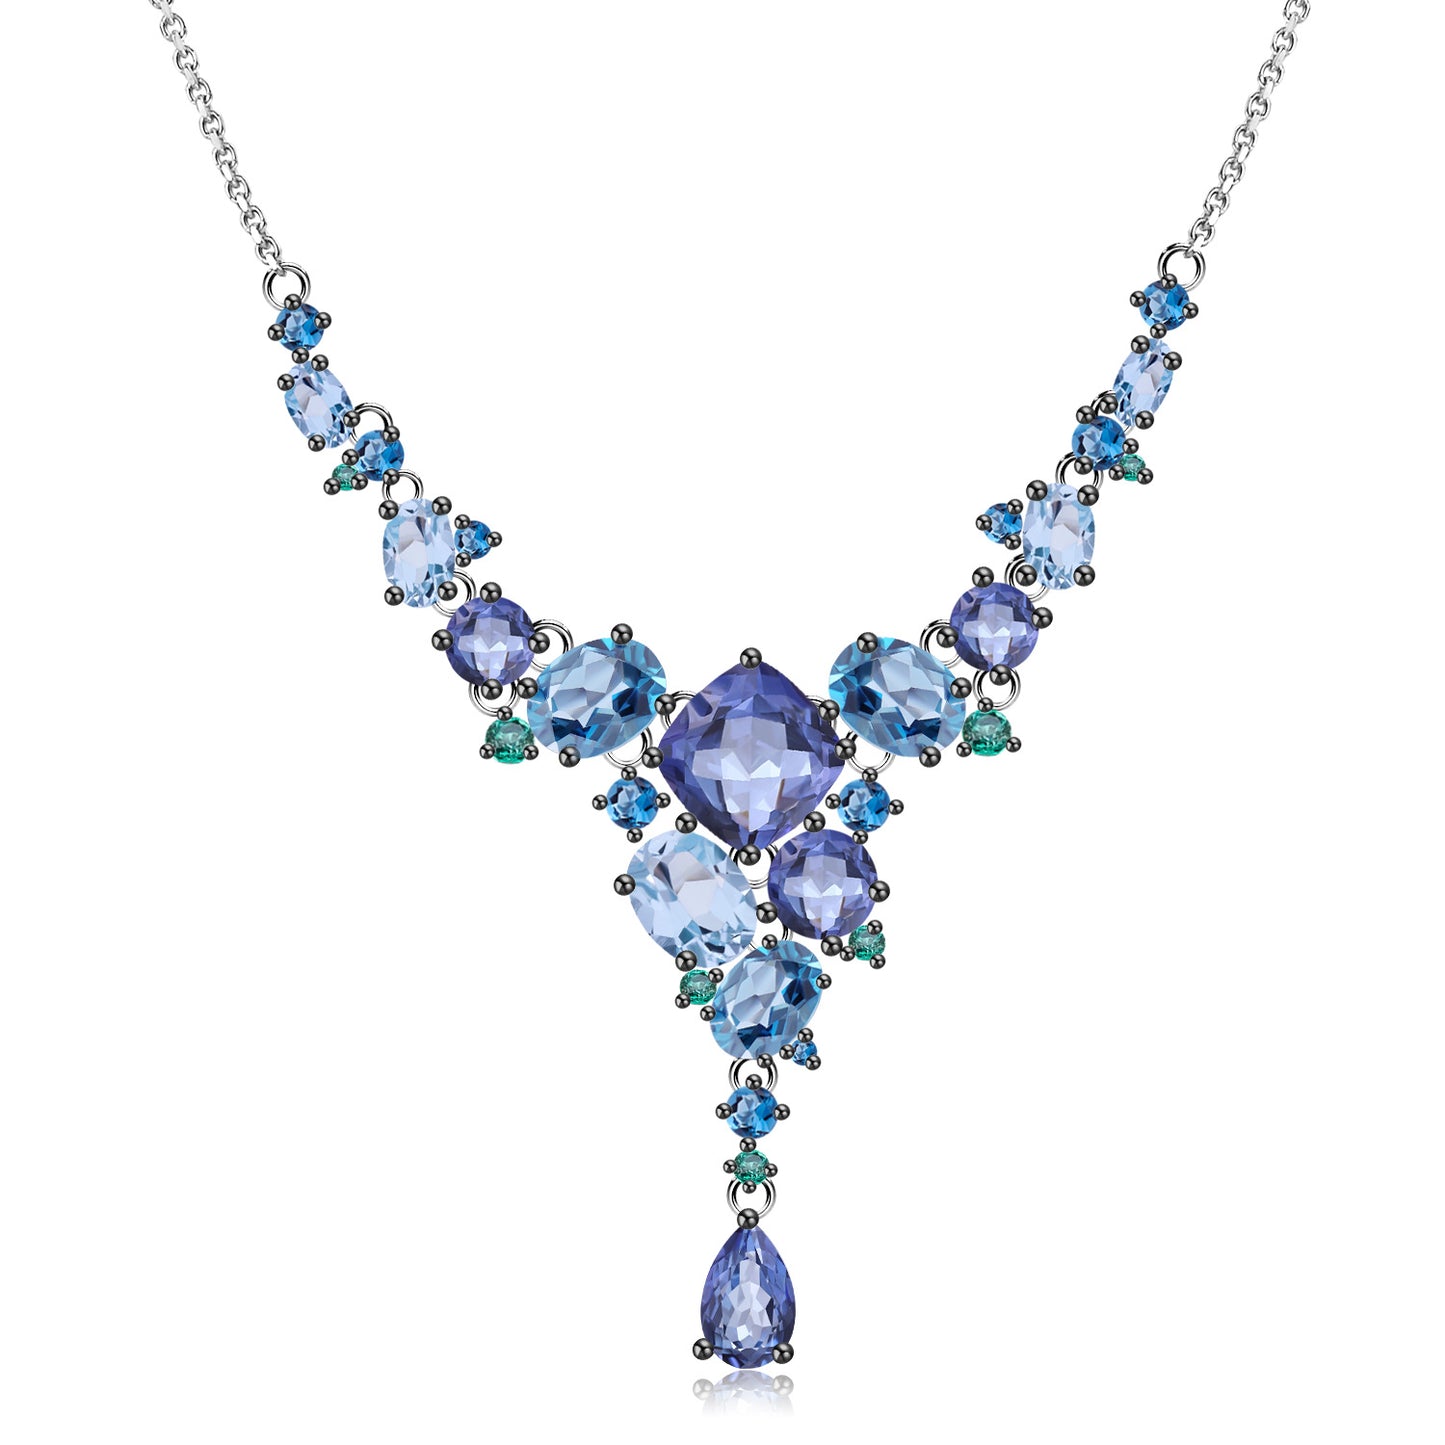 Unique Banquet Luxury Design Natural Topaz with Colourful Gemstones Pendant Sterling Silver Necklace for Women